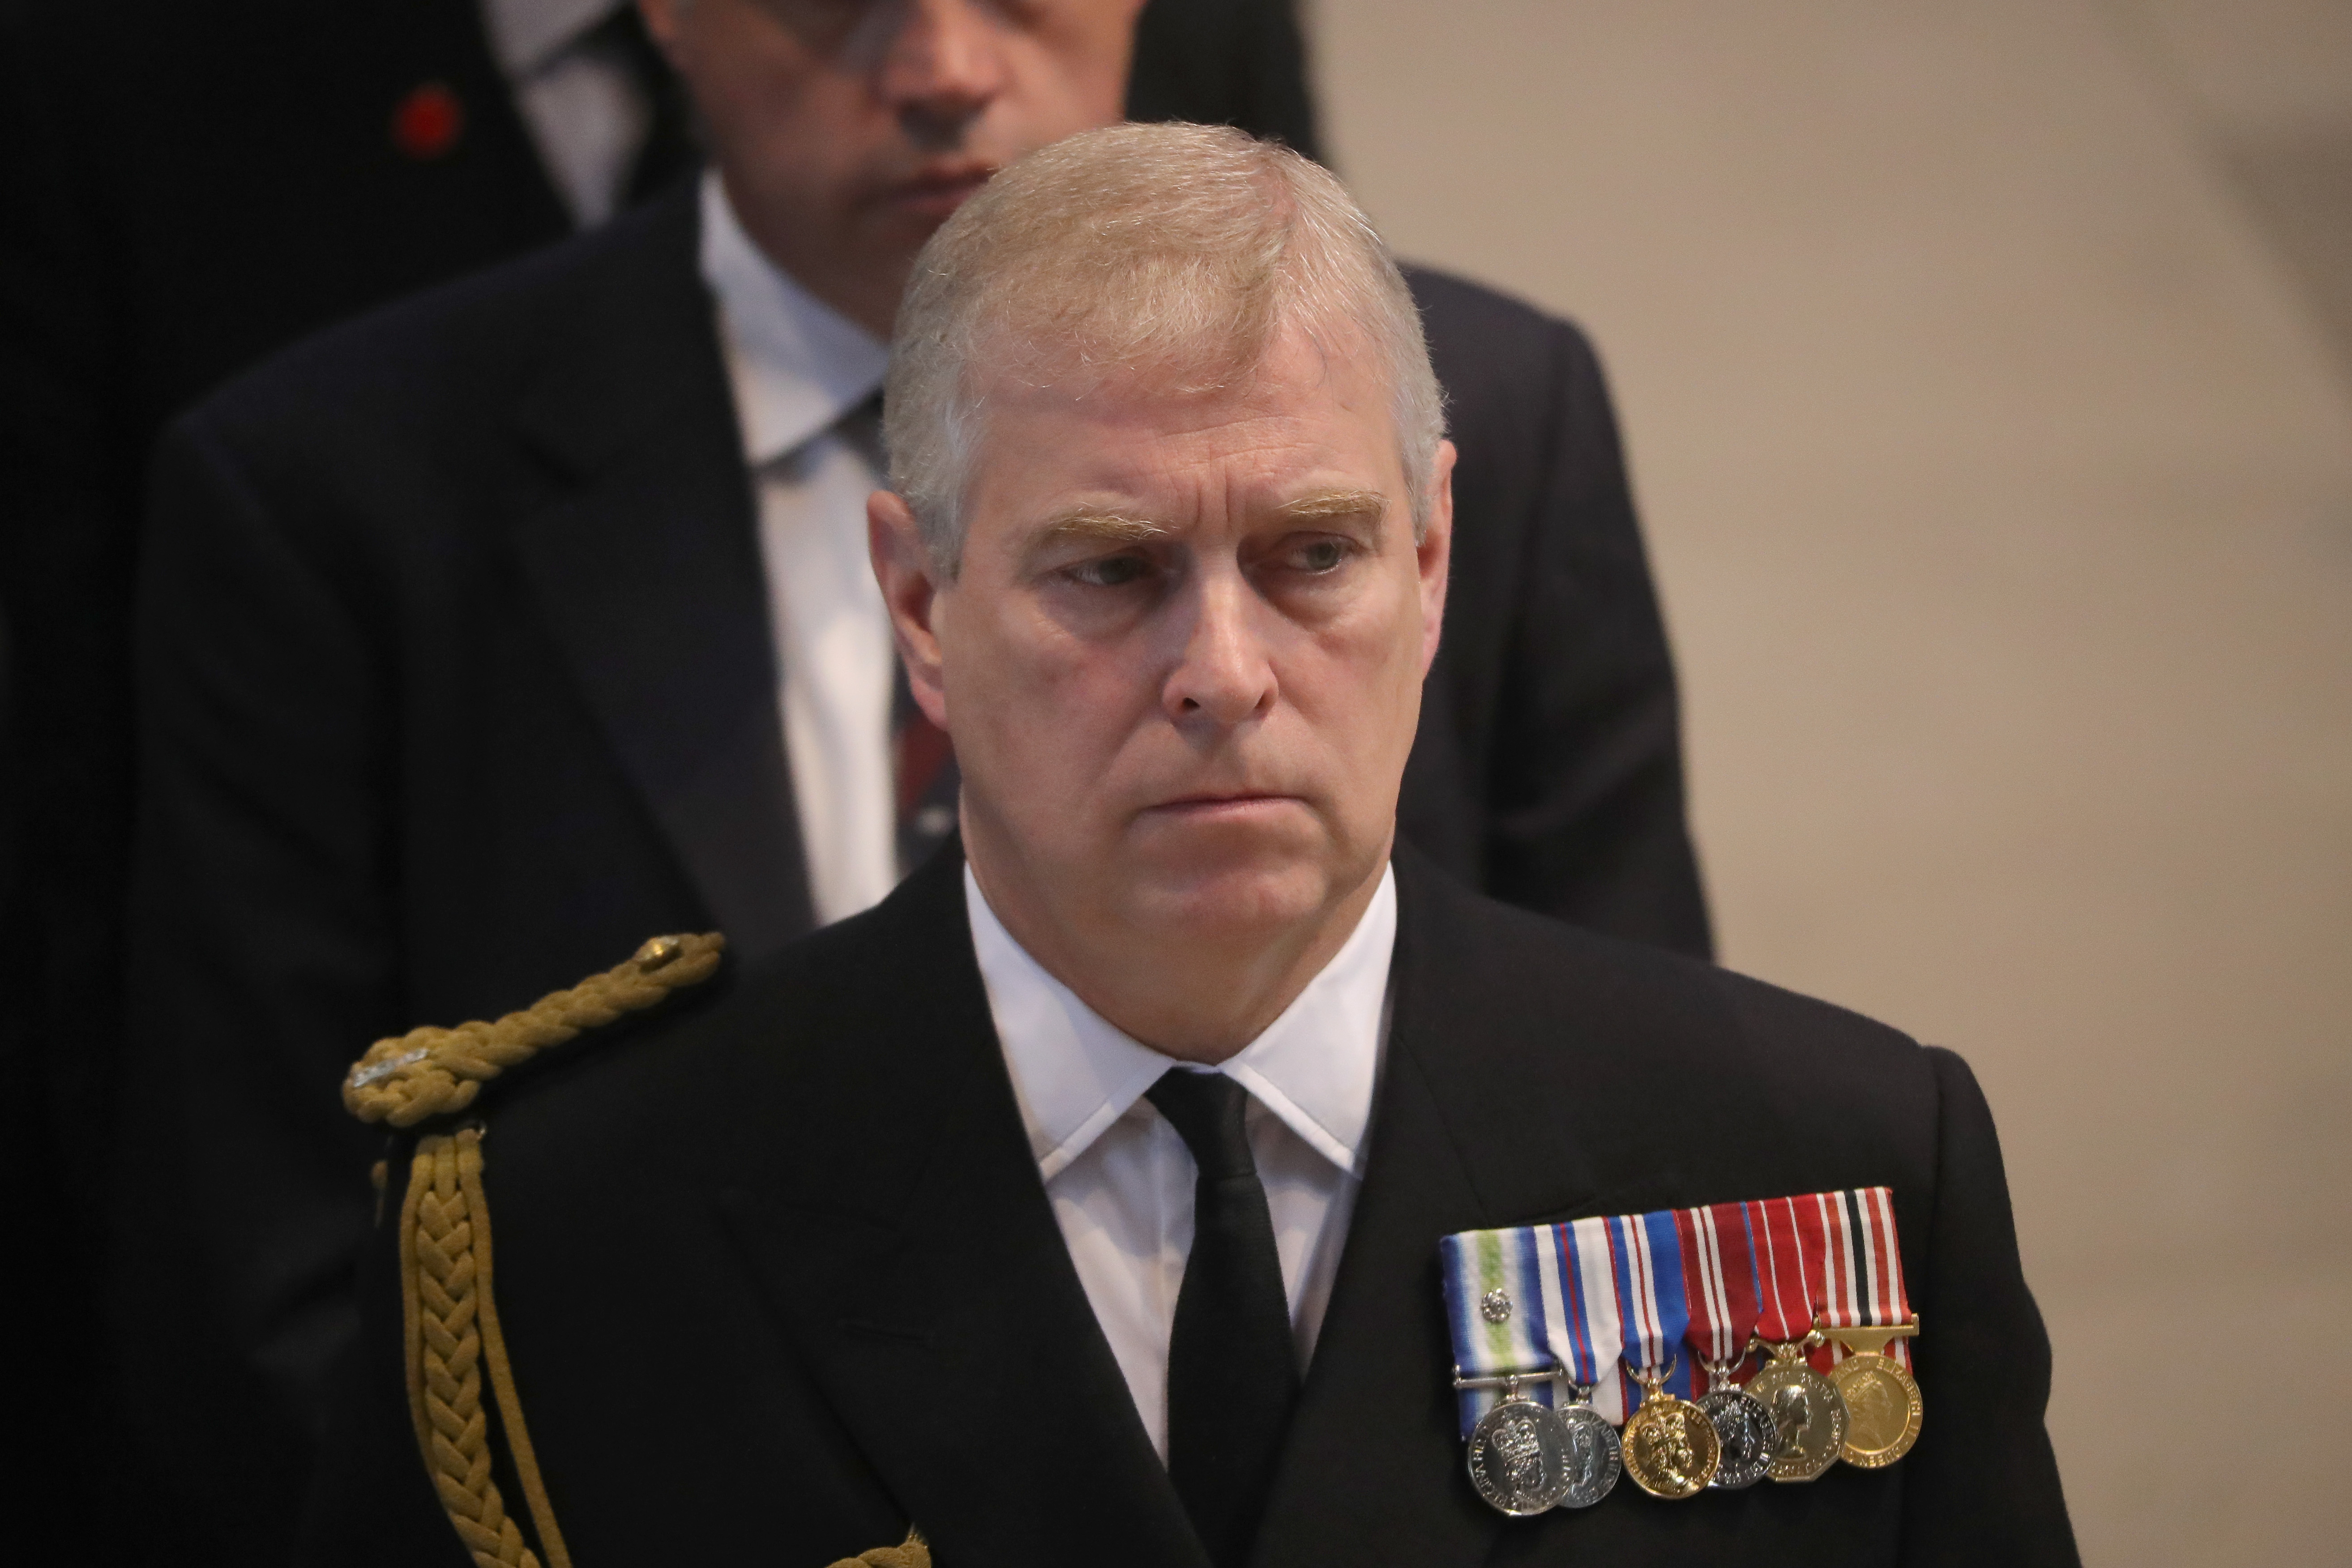 Prince Andrew at a service marking the anniversary since the start of the Battle of the Somme